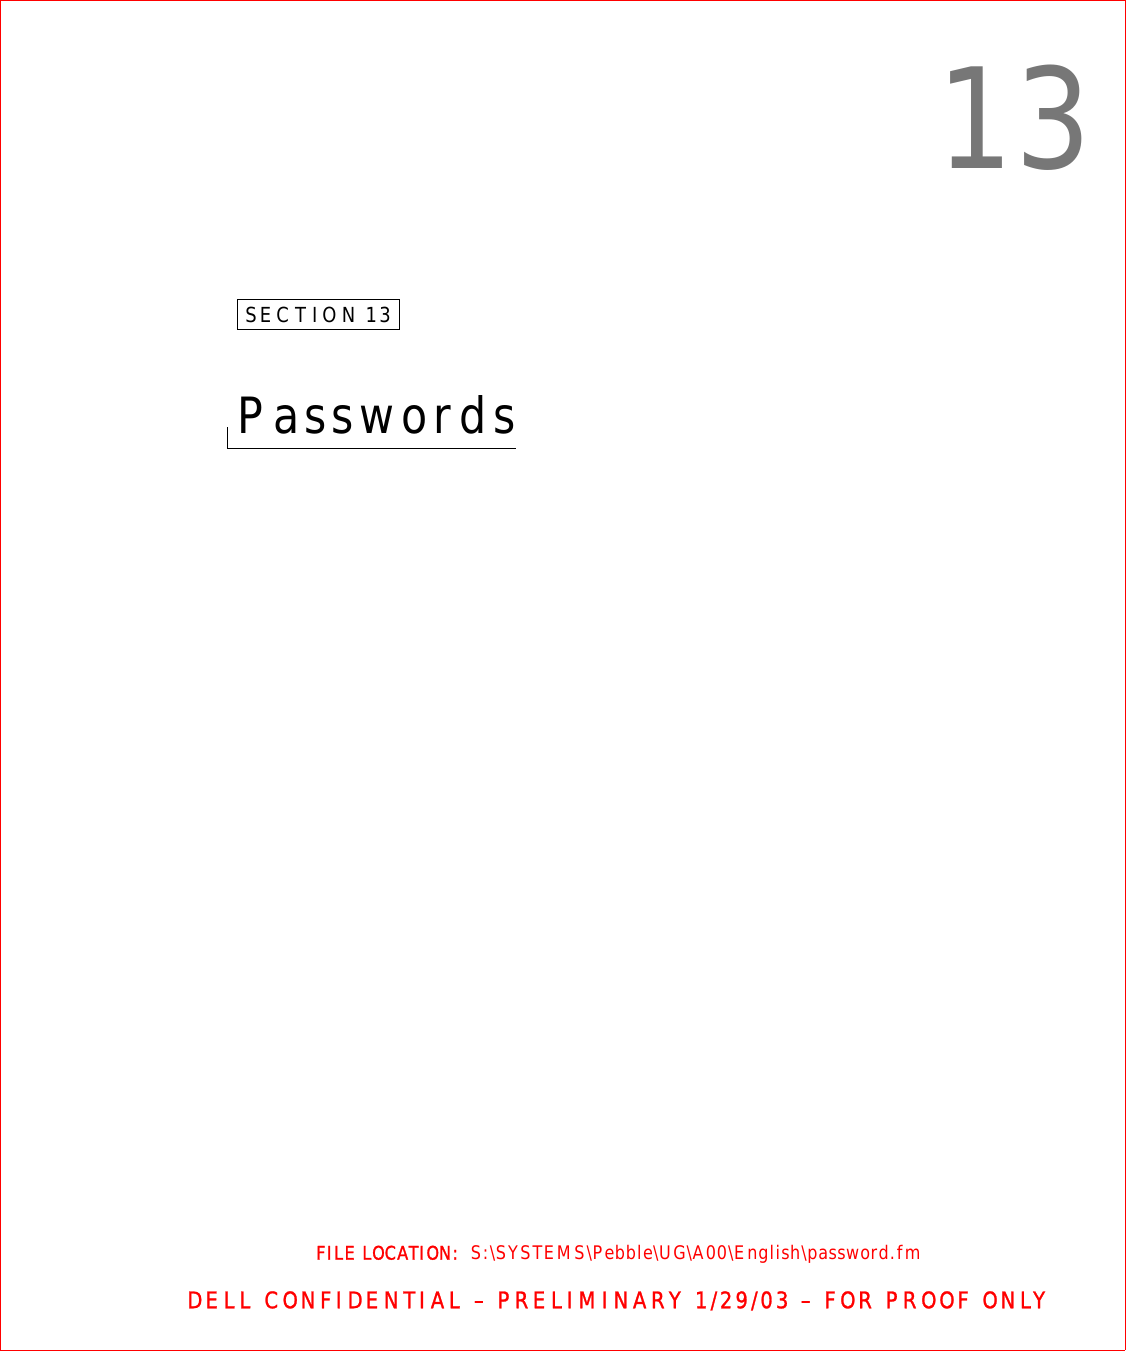 FILE LOCATION:  S:\SYSTEMS\Pebble\UG\A00\English\password.fmDELL CONFIDENTIAL – PRELIMINARY 1/29/03 – FOR PROOF ONLY13SECTION 13Passwords 